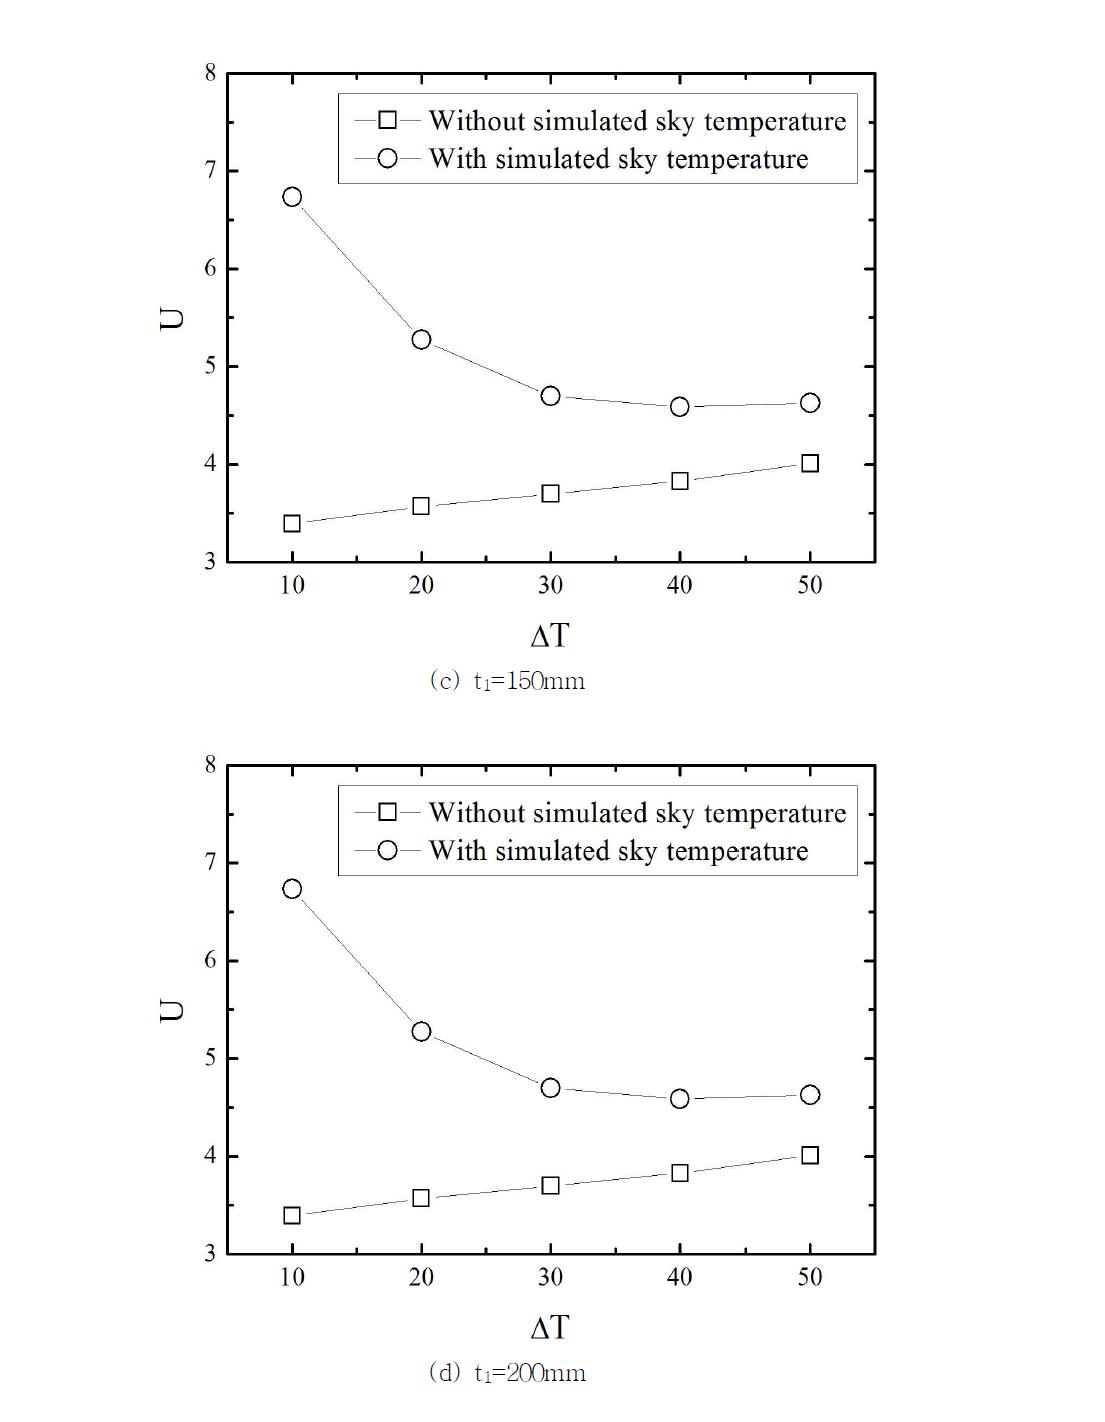 Distributions of overall heat transfer coefficients with variation of temperature difference for polyethylene film 2 layer